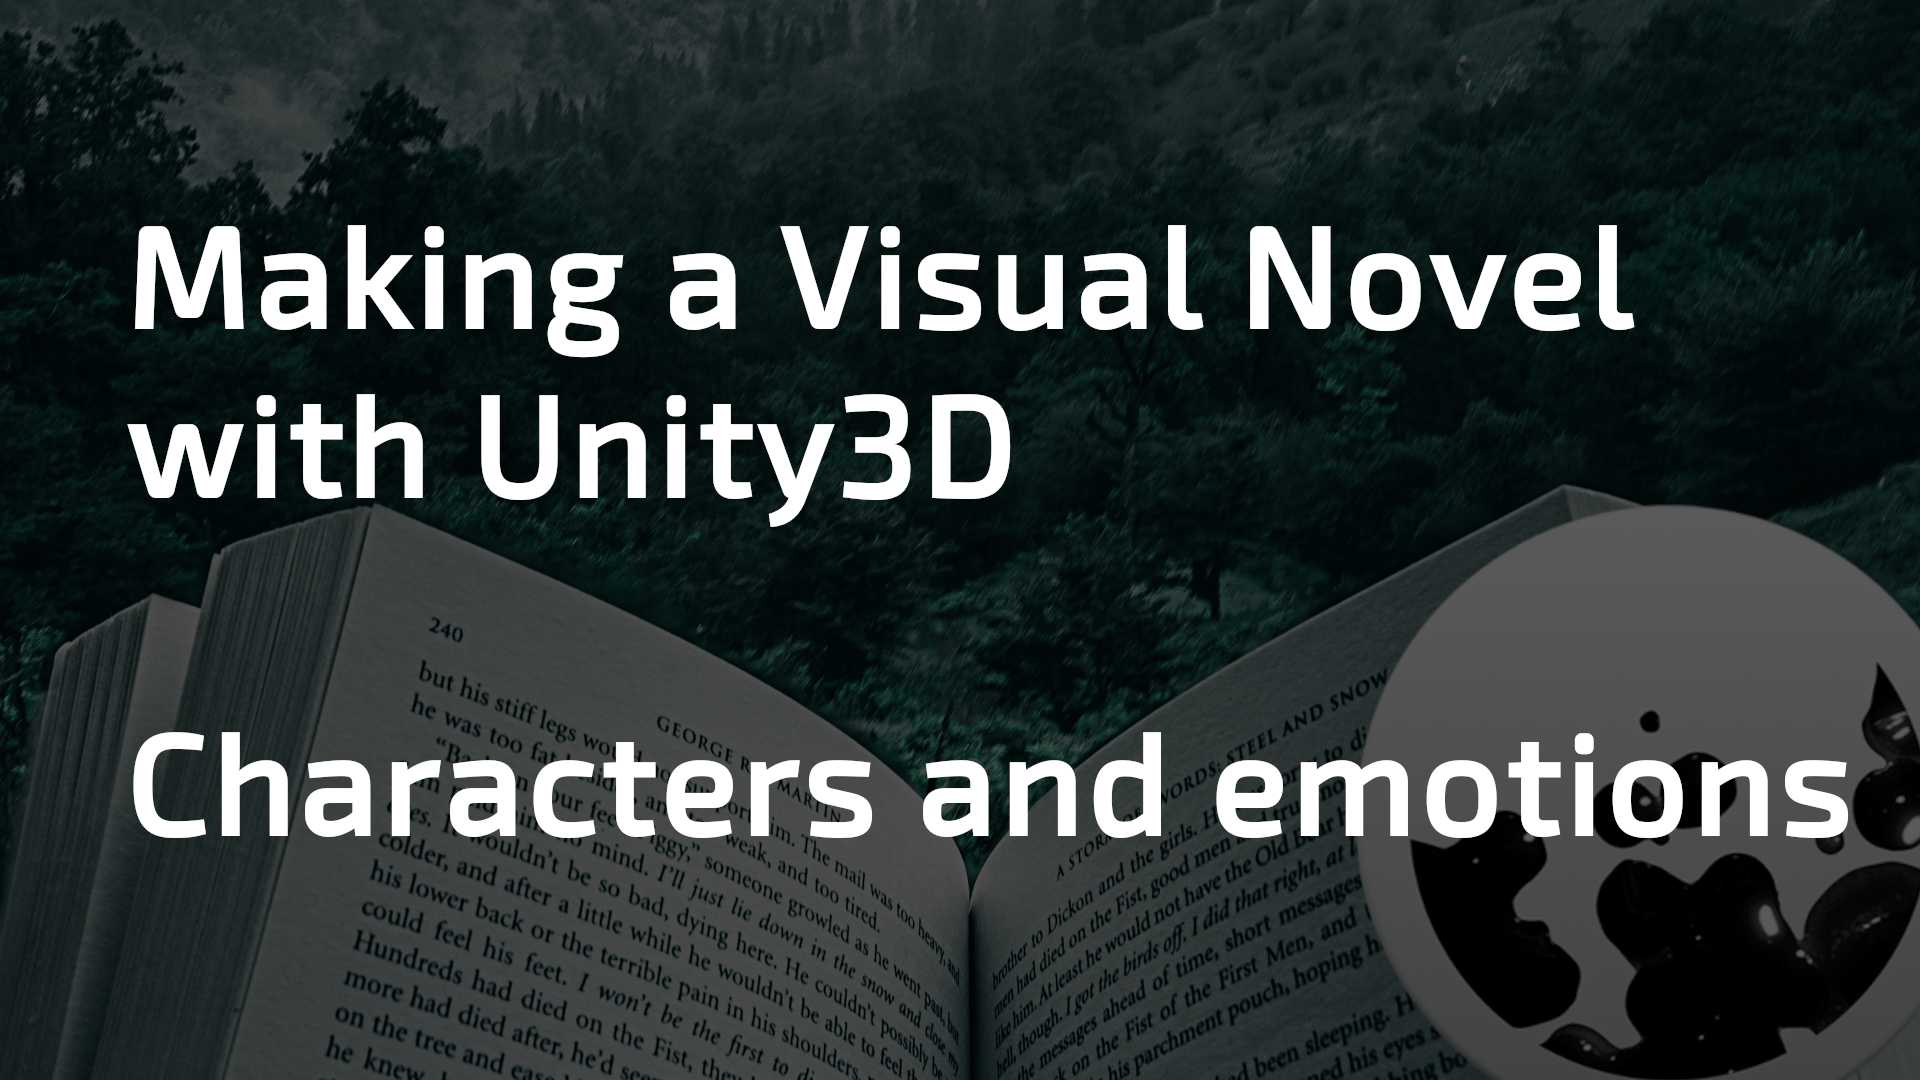 VN Character Creator app by Game Dev Assets